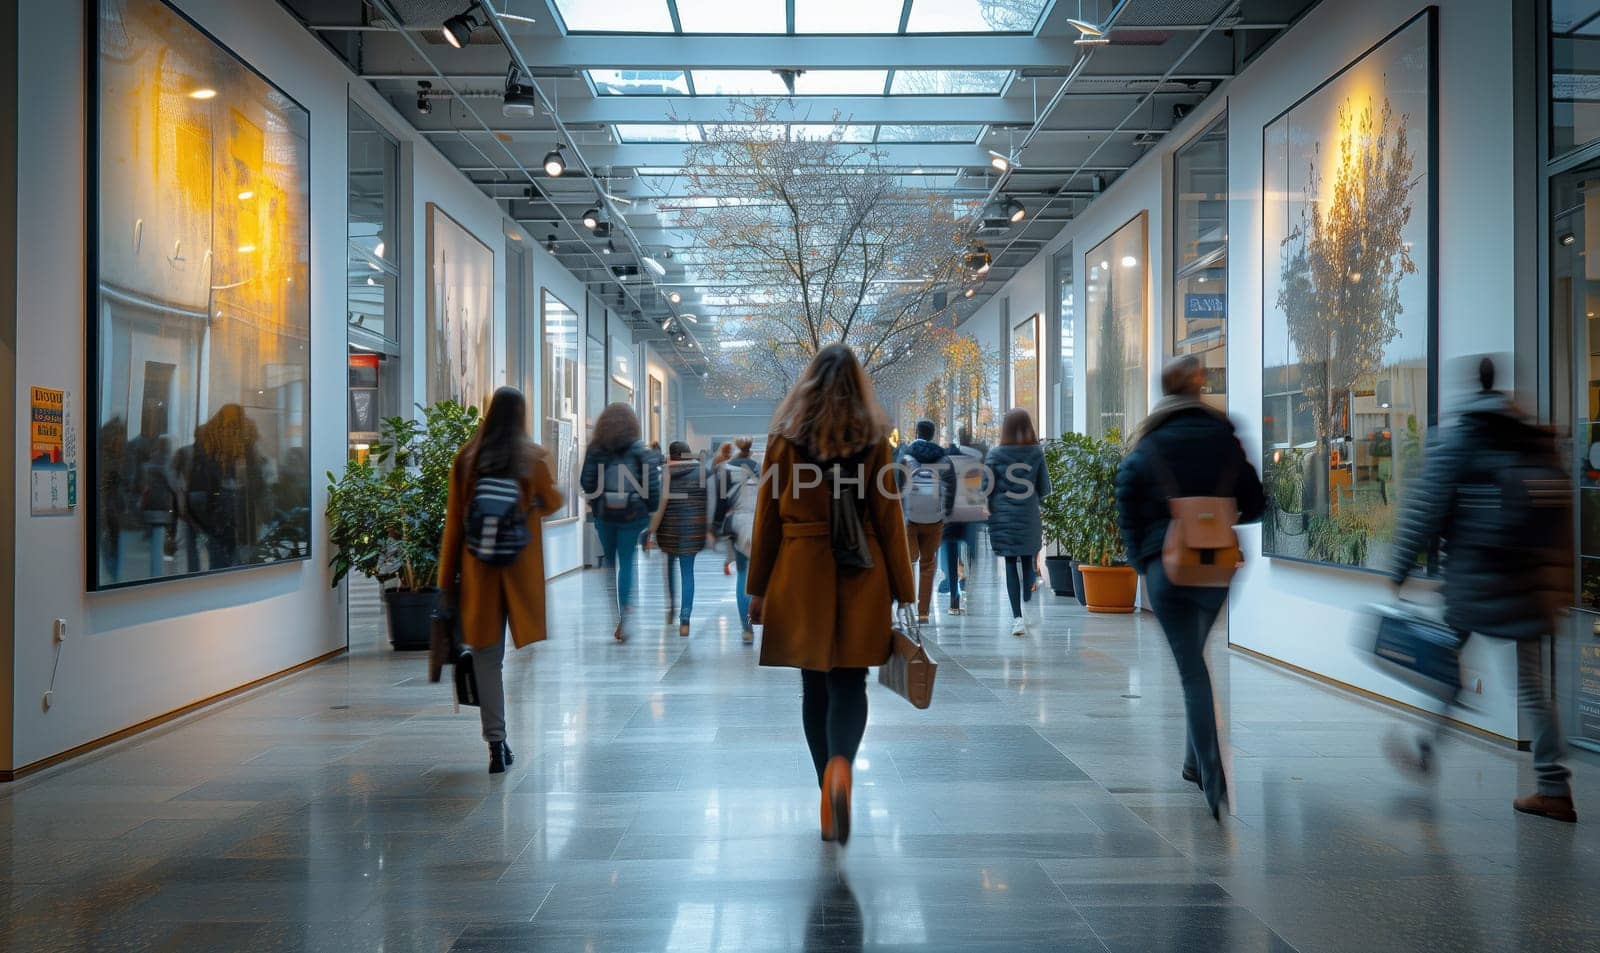 A group of pedestrians strolling through the museum building admiring the art fixtures and clean flooring, enjoying the symmetry and event in the city